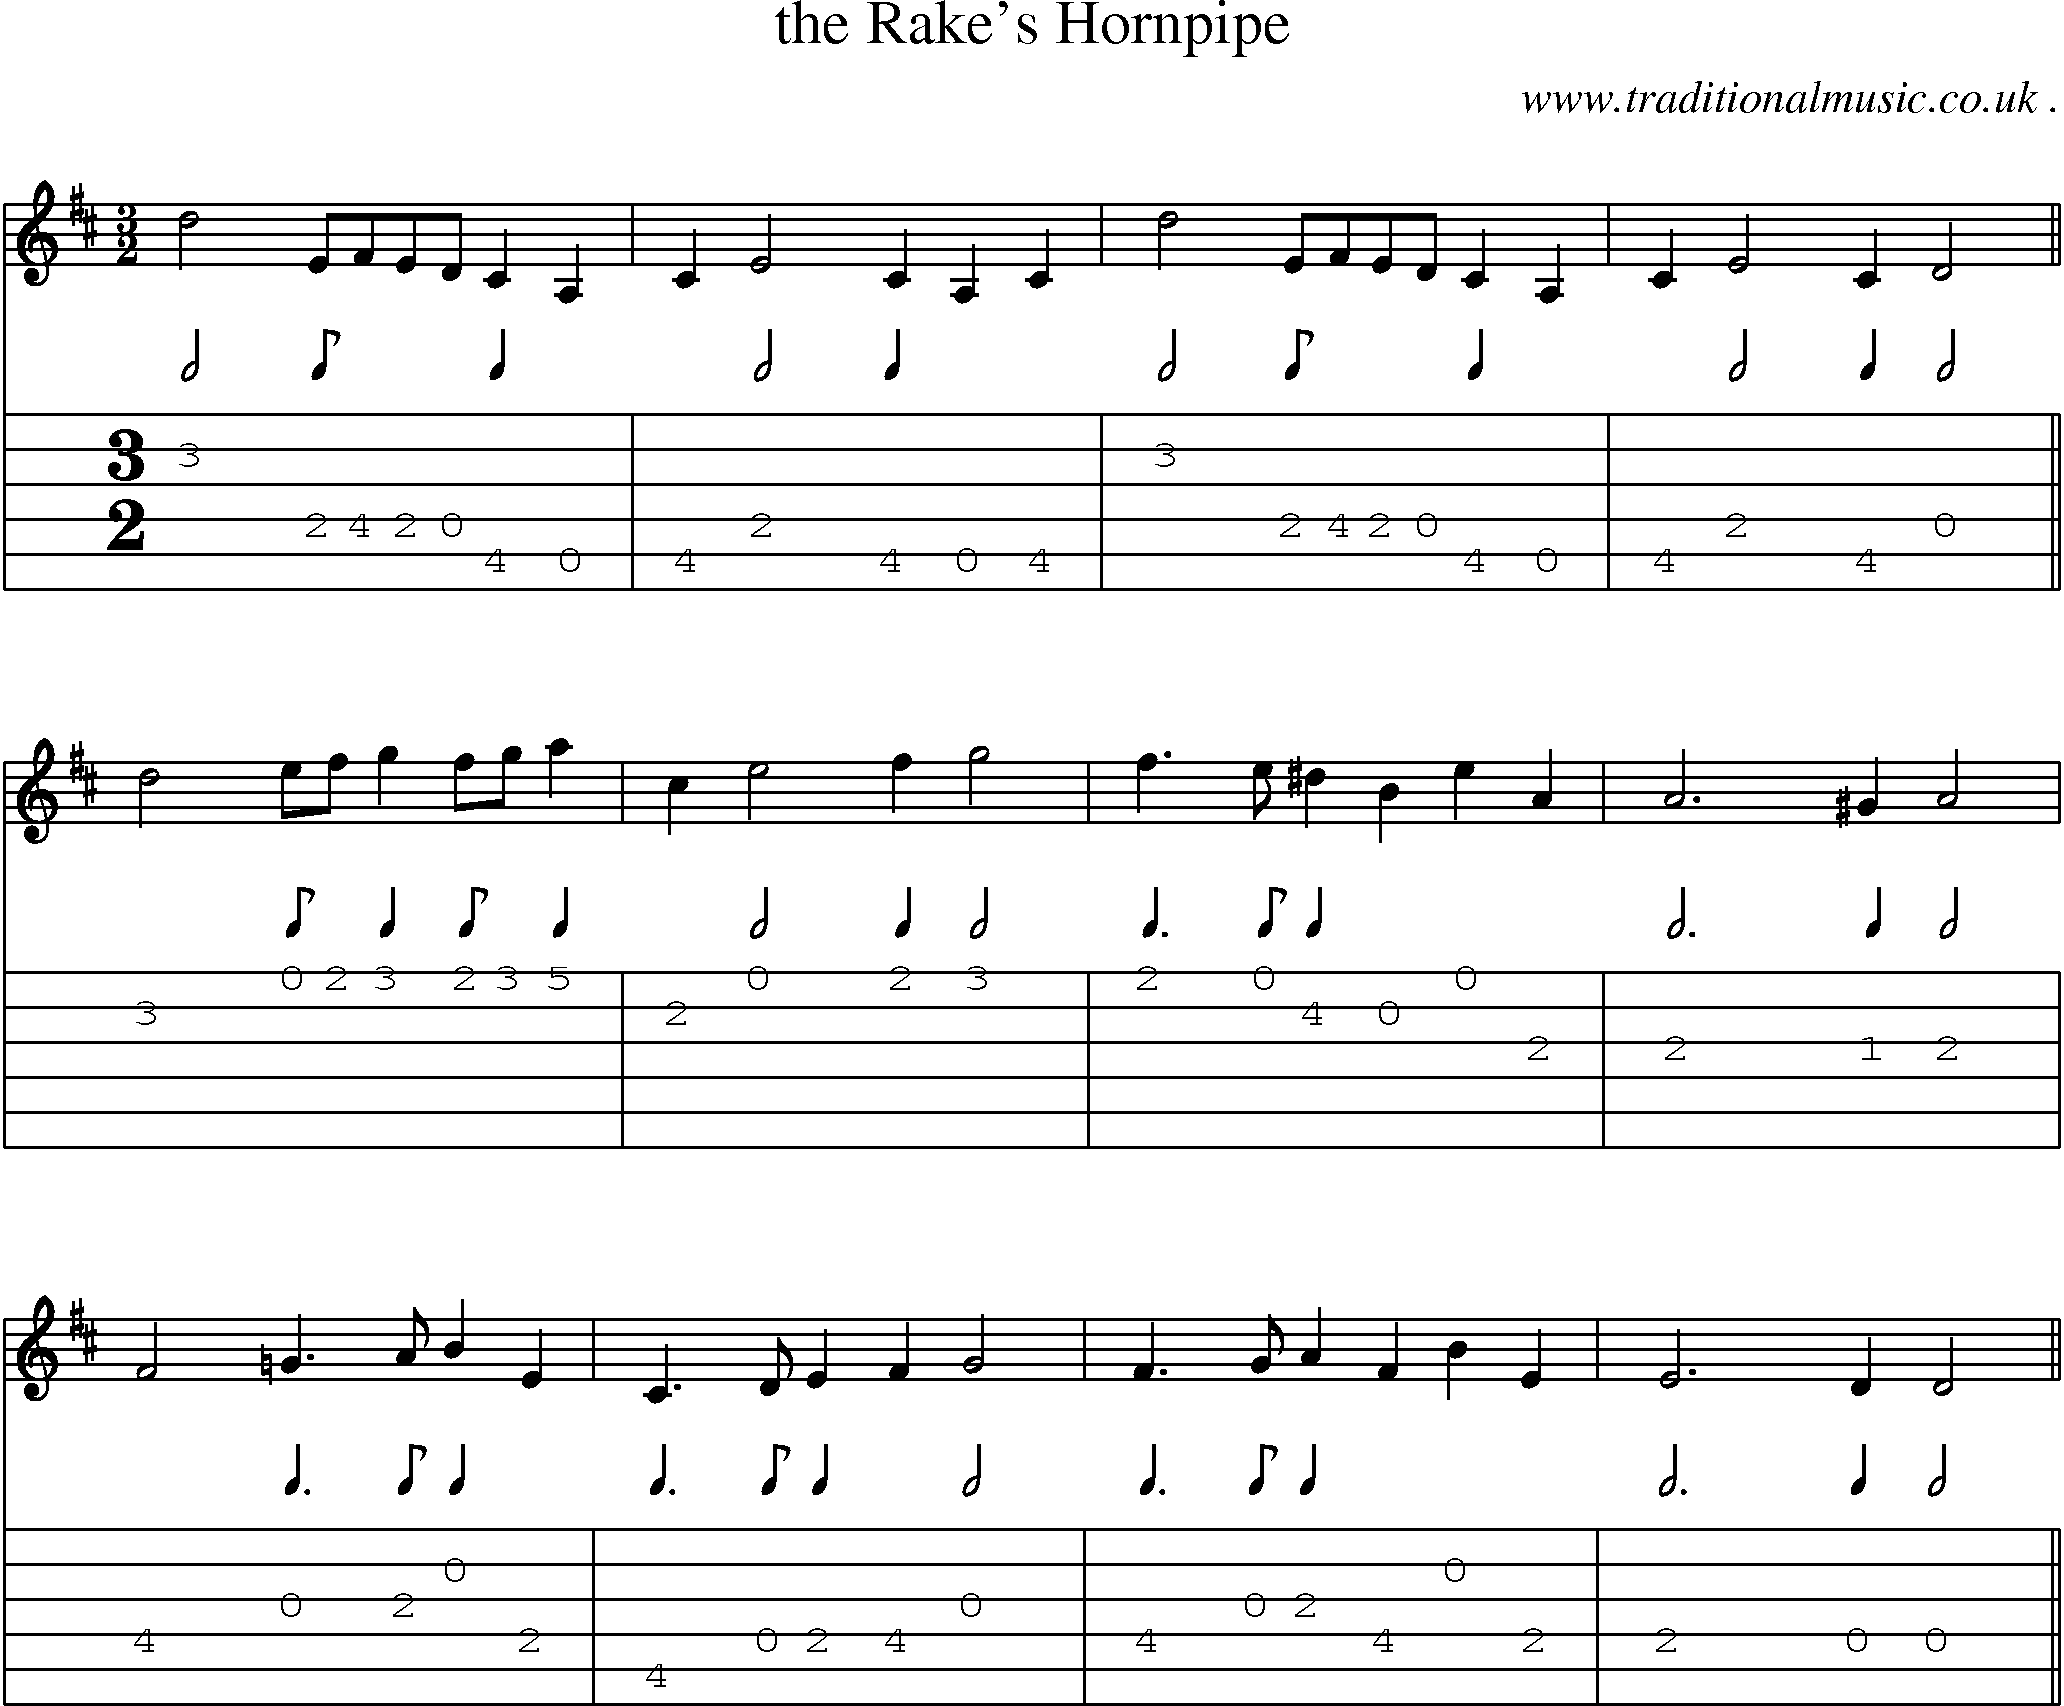 Sheet-Music and Guitar Tabs for The Rakes Hornpipe